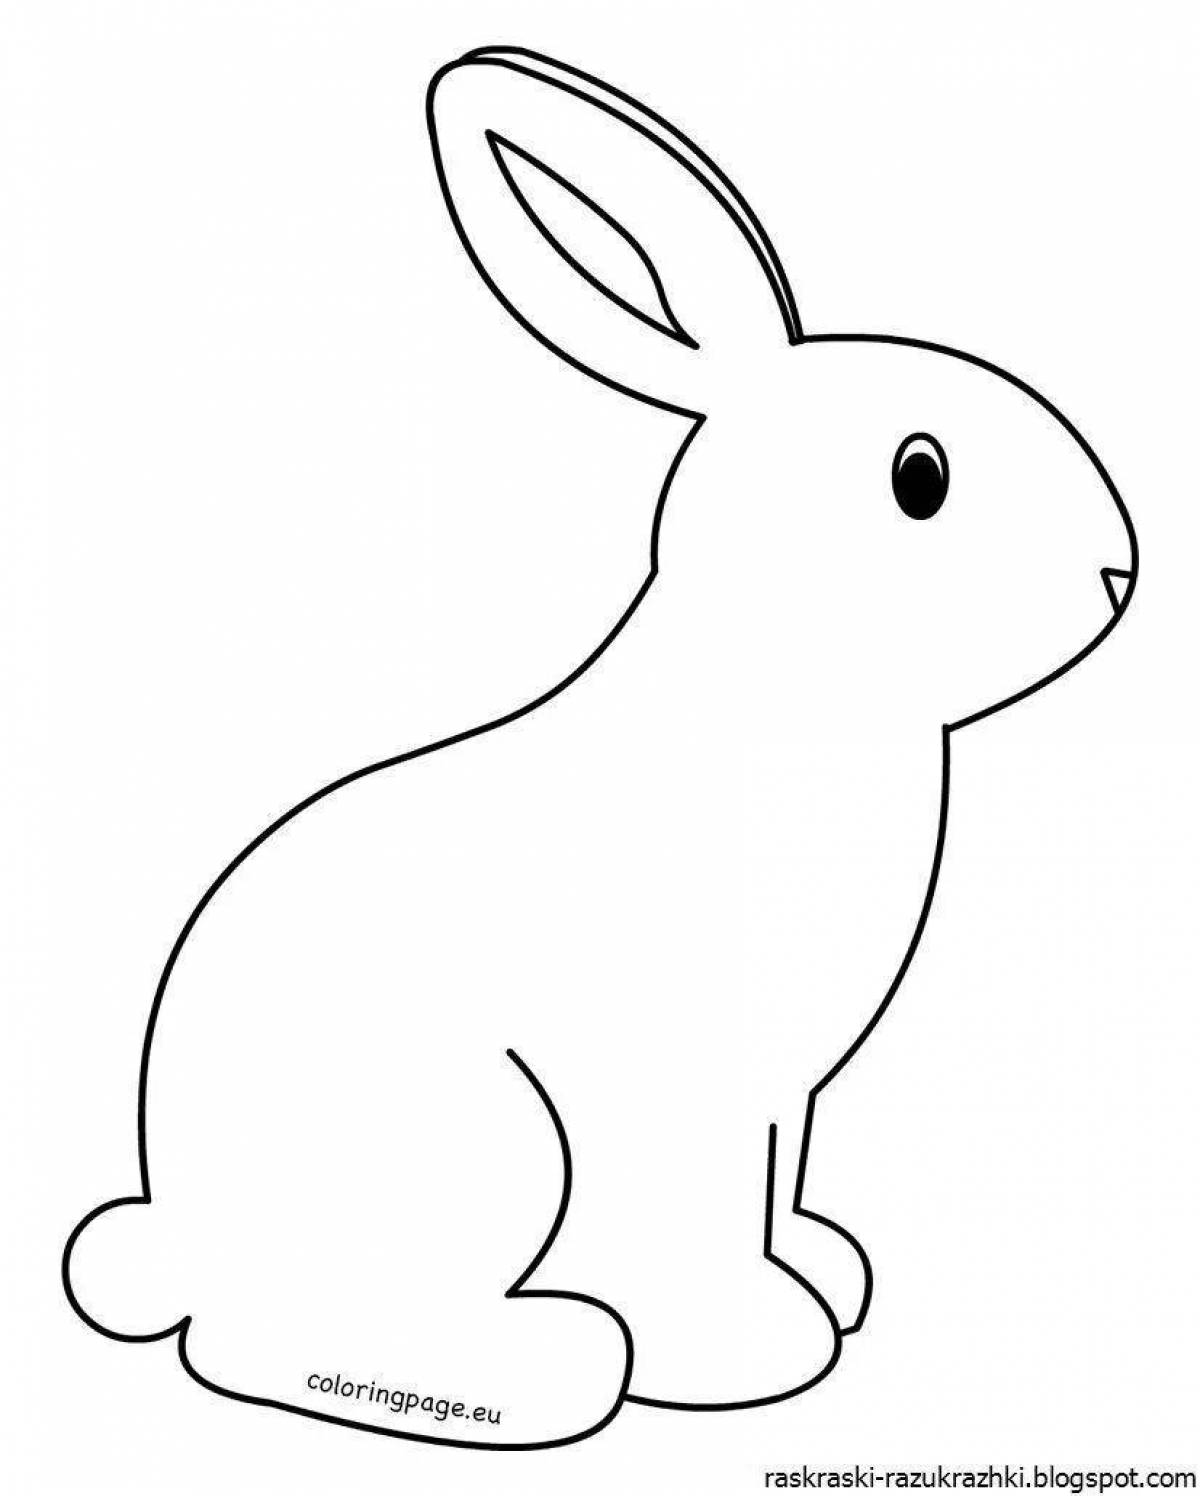 Outline sparkling hare coloring